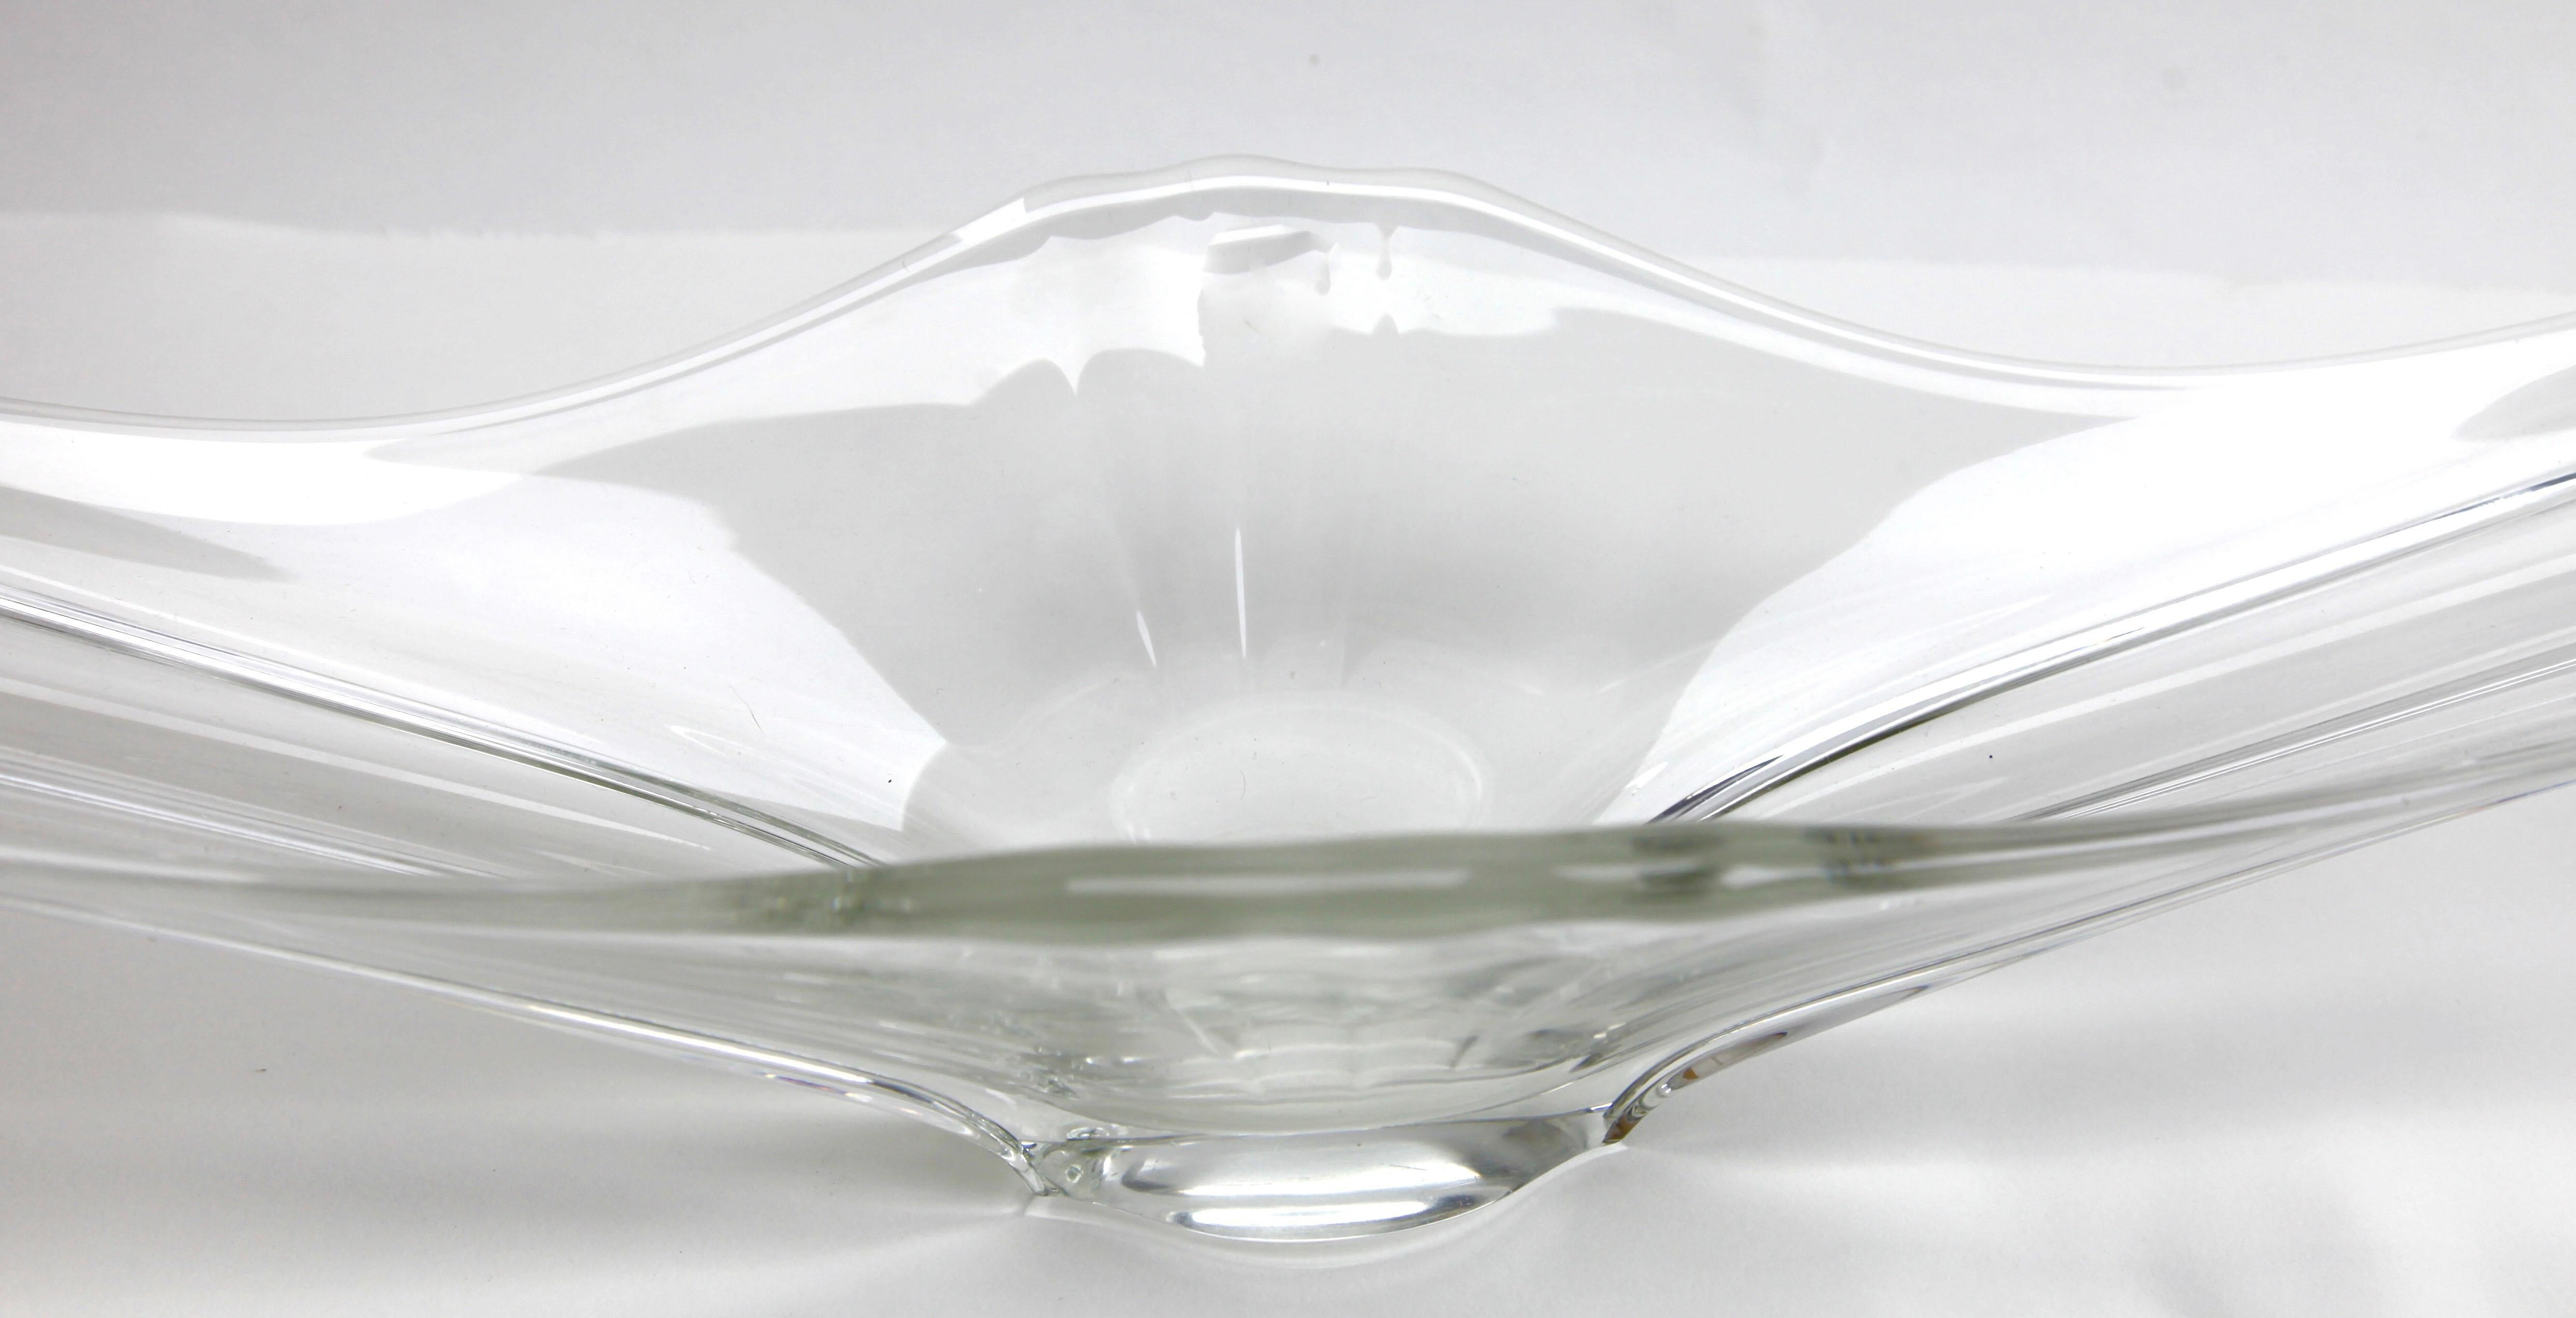 Vintage Val Saint Lambert stretch fruit dish or bowl in clear crystal. The item can be used as a table centerpiece or on a mantelpiece.
It has two large stretched ribbed 'handles' reaching out from the center, giving it a strong period look.
The